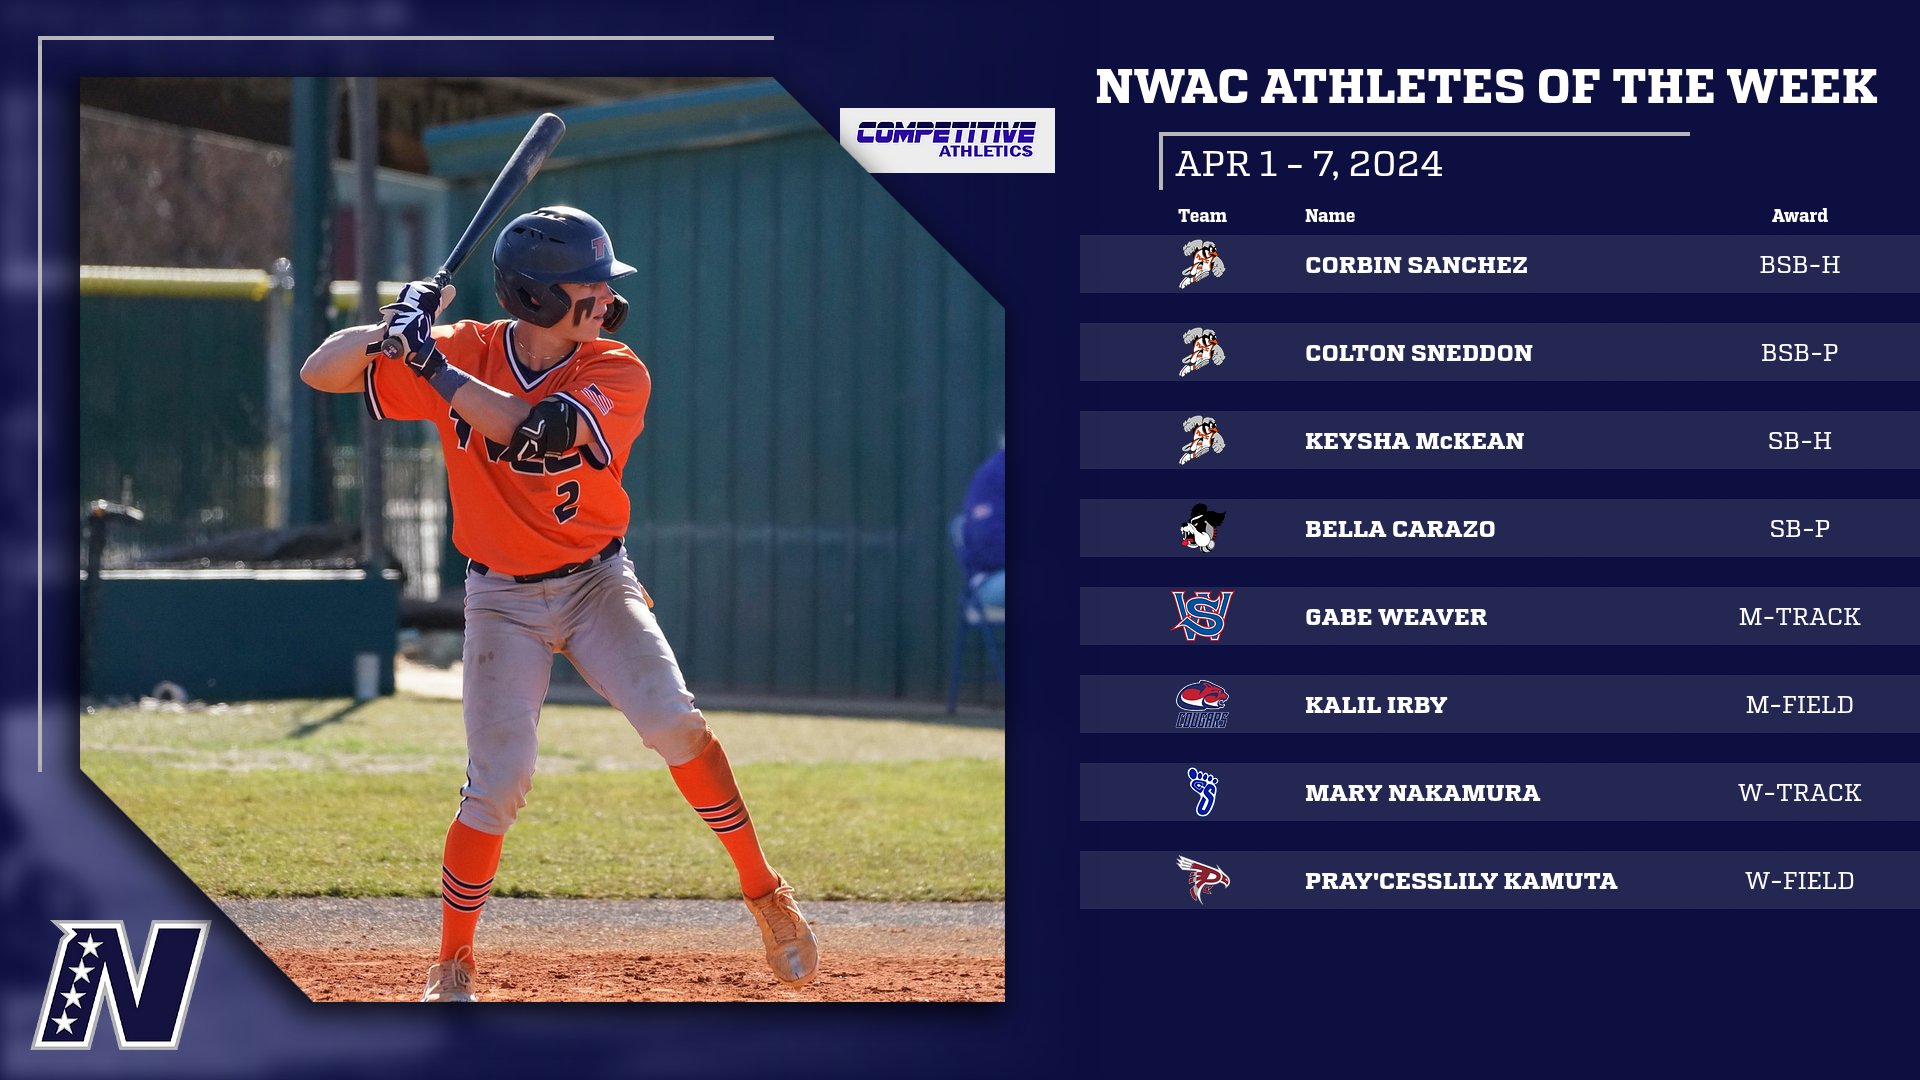 Competitive Athletics NWAC Athletes of the Week: April 1 - 7